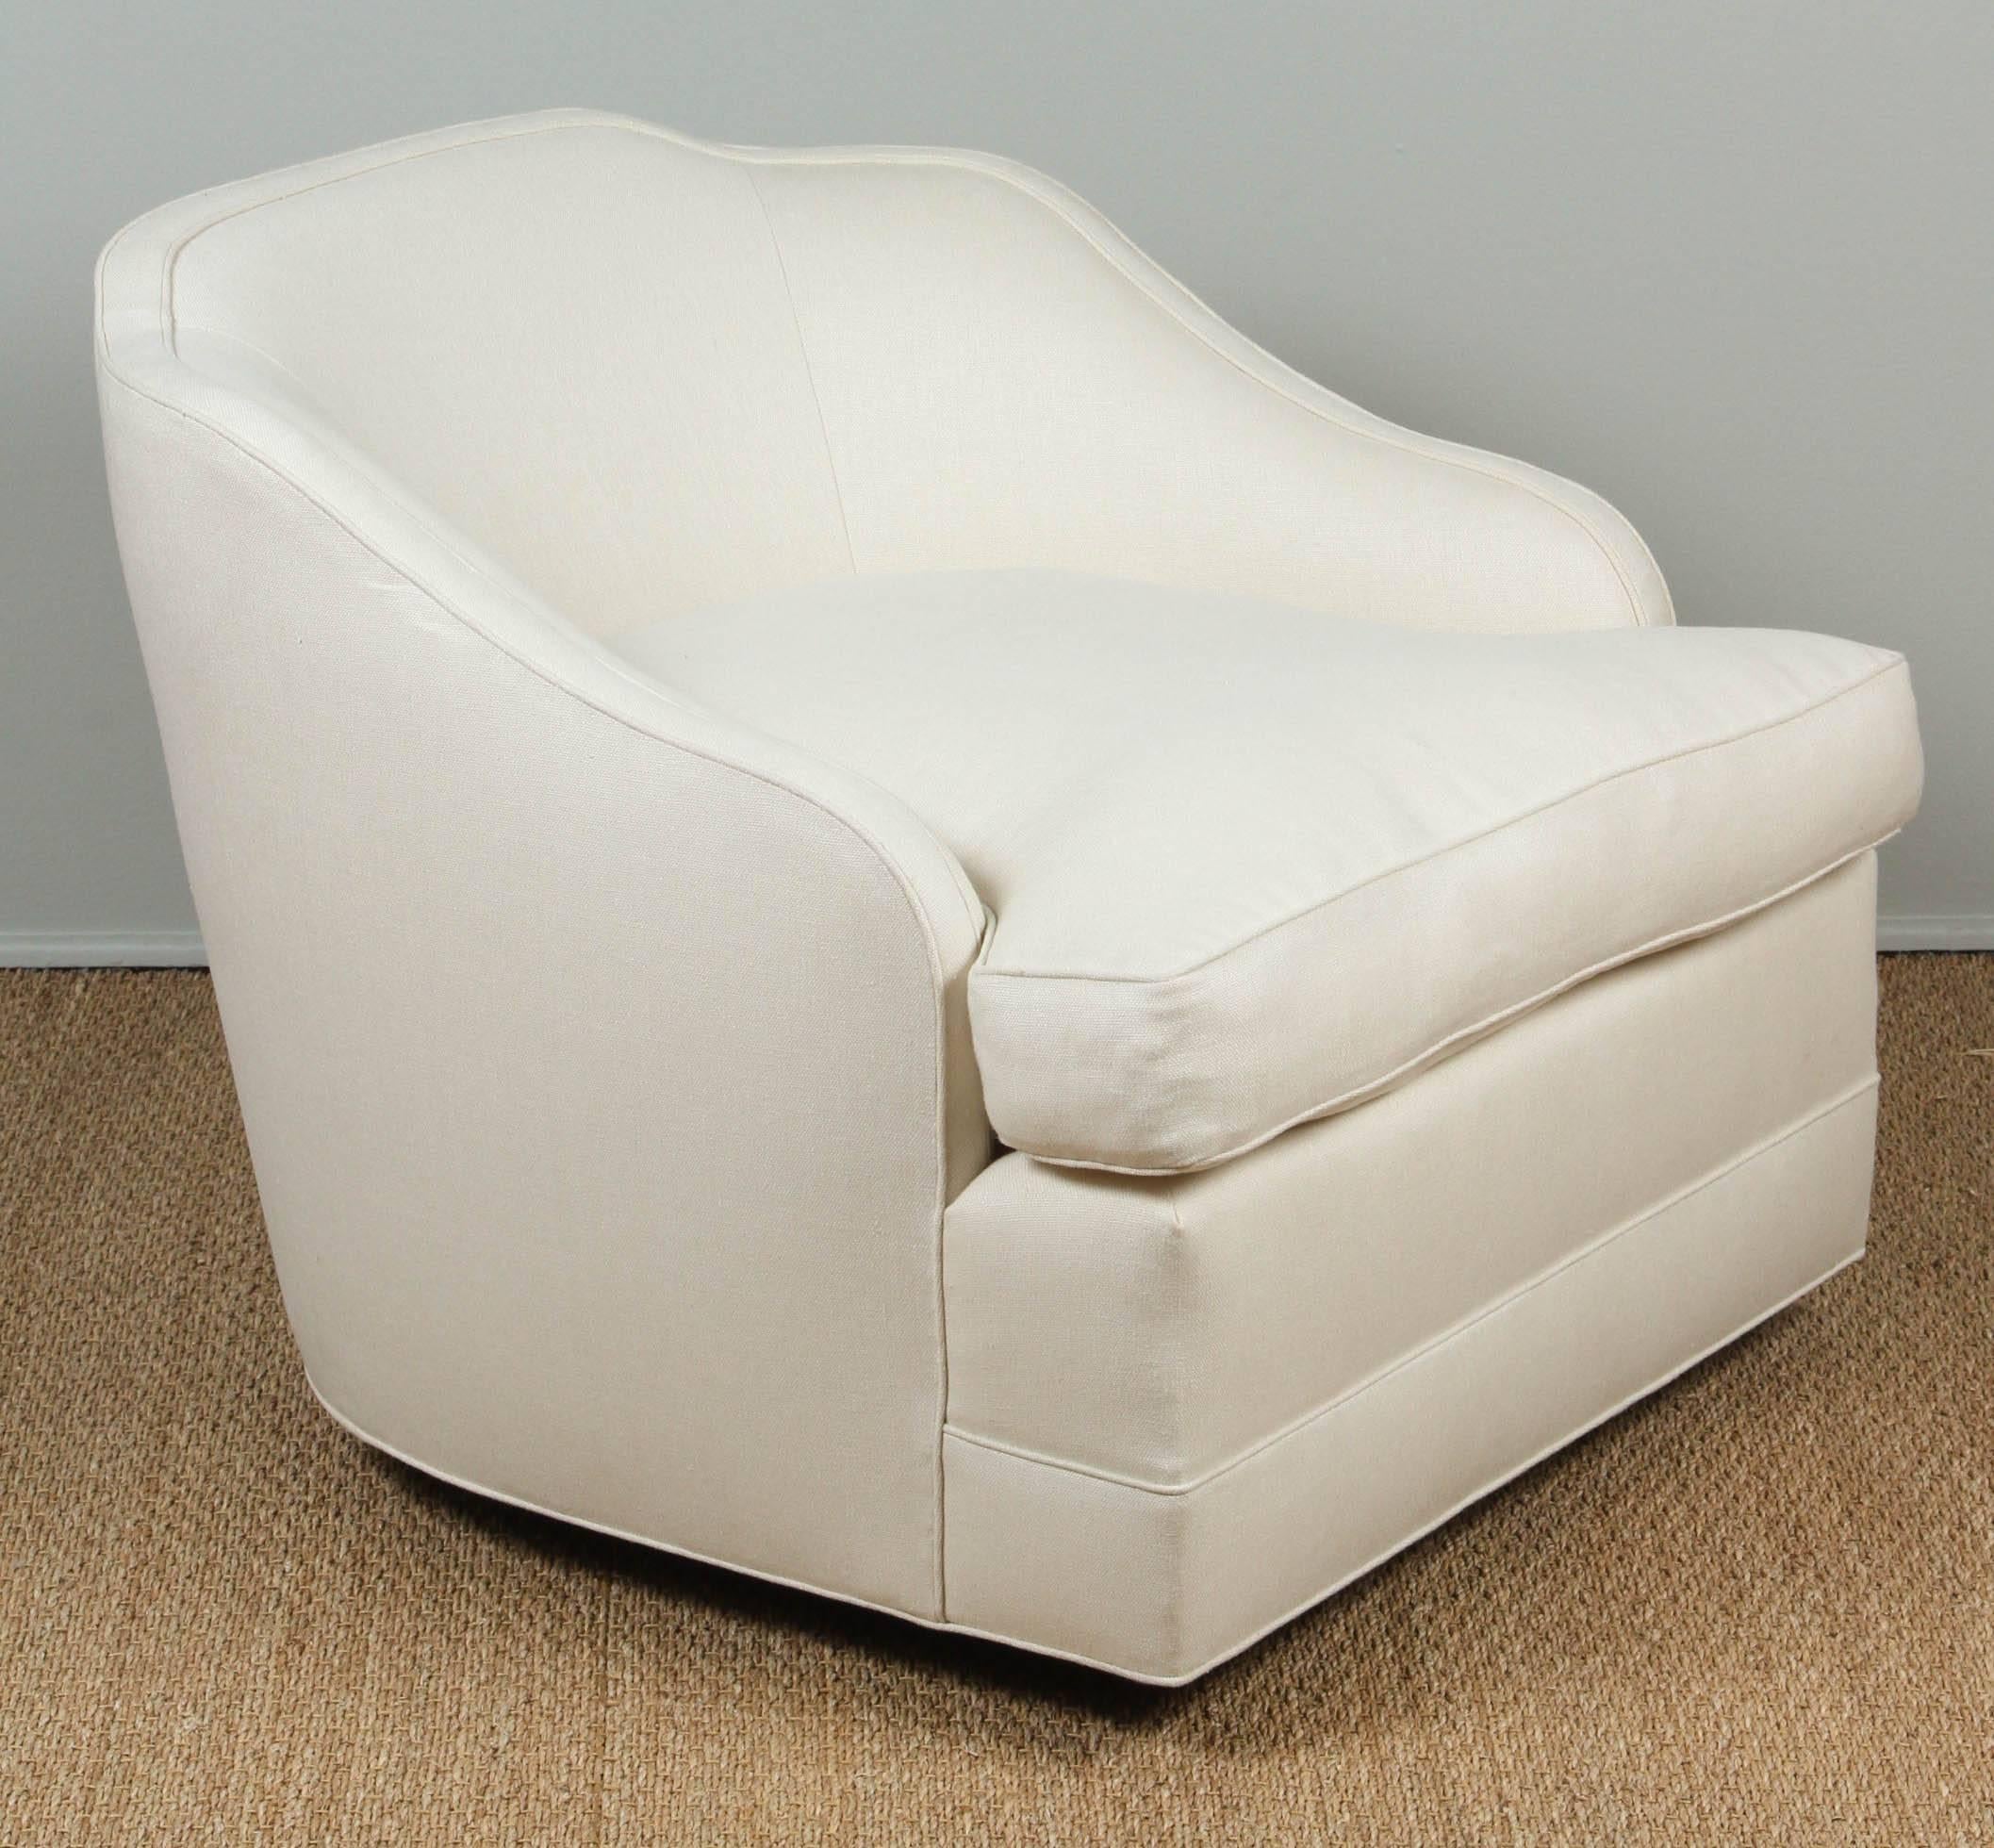 Updated white linen upholstery. New feather and down seat cushion. Swivels on a wood base with caster wheels.